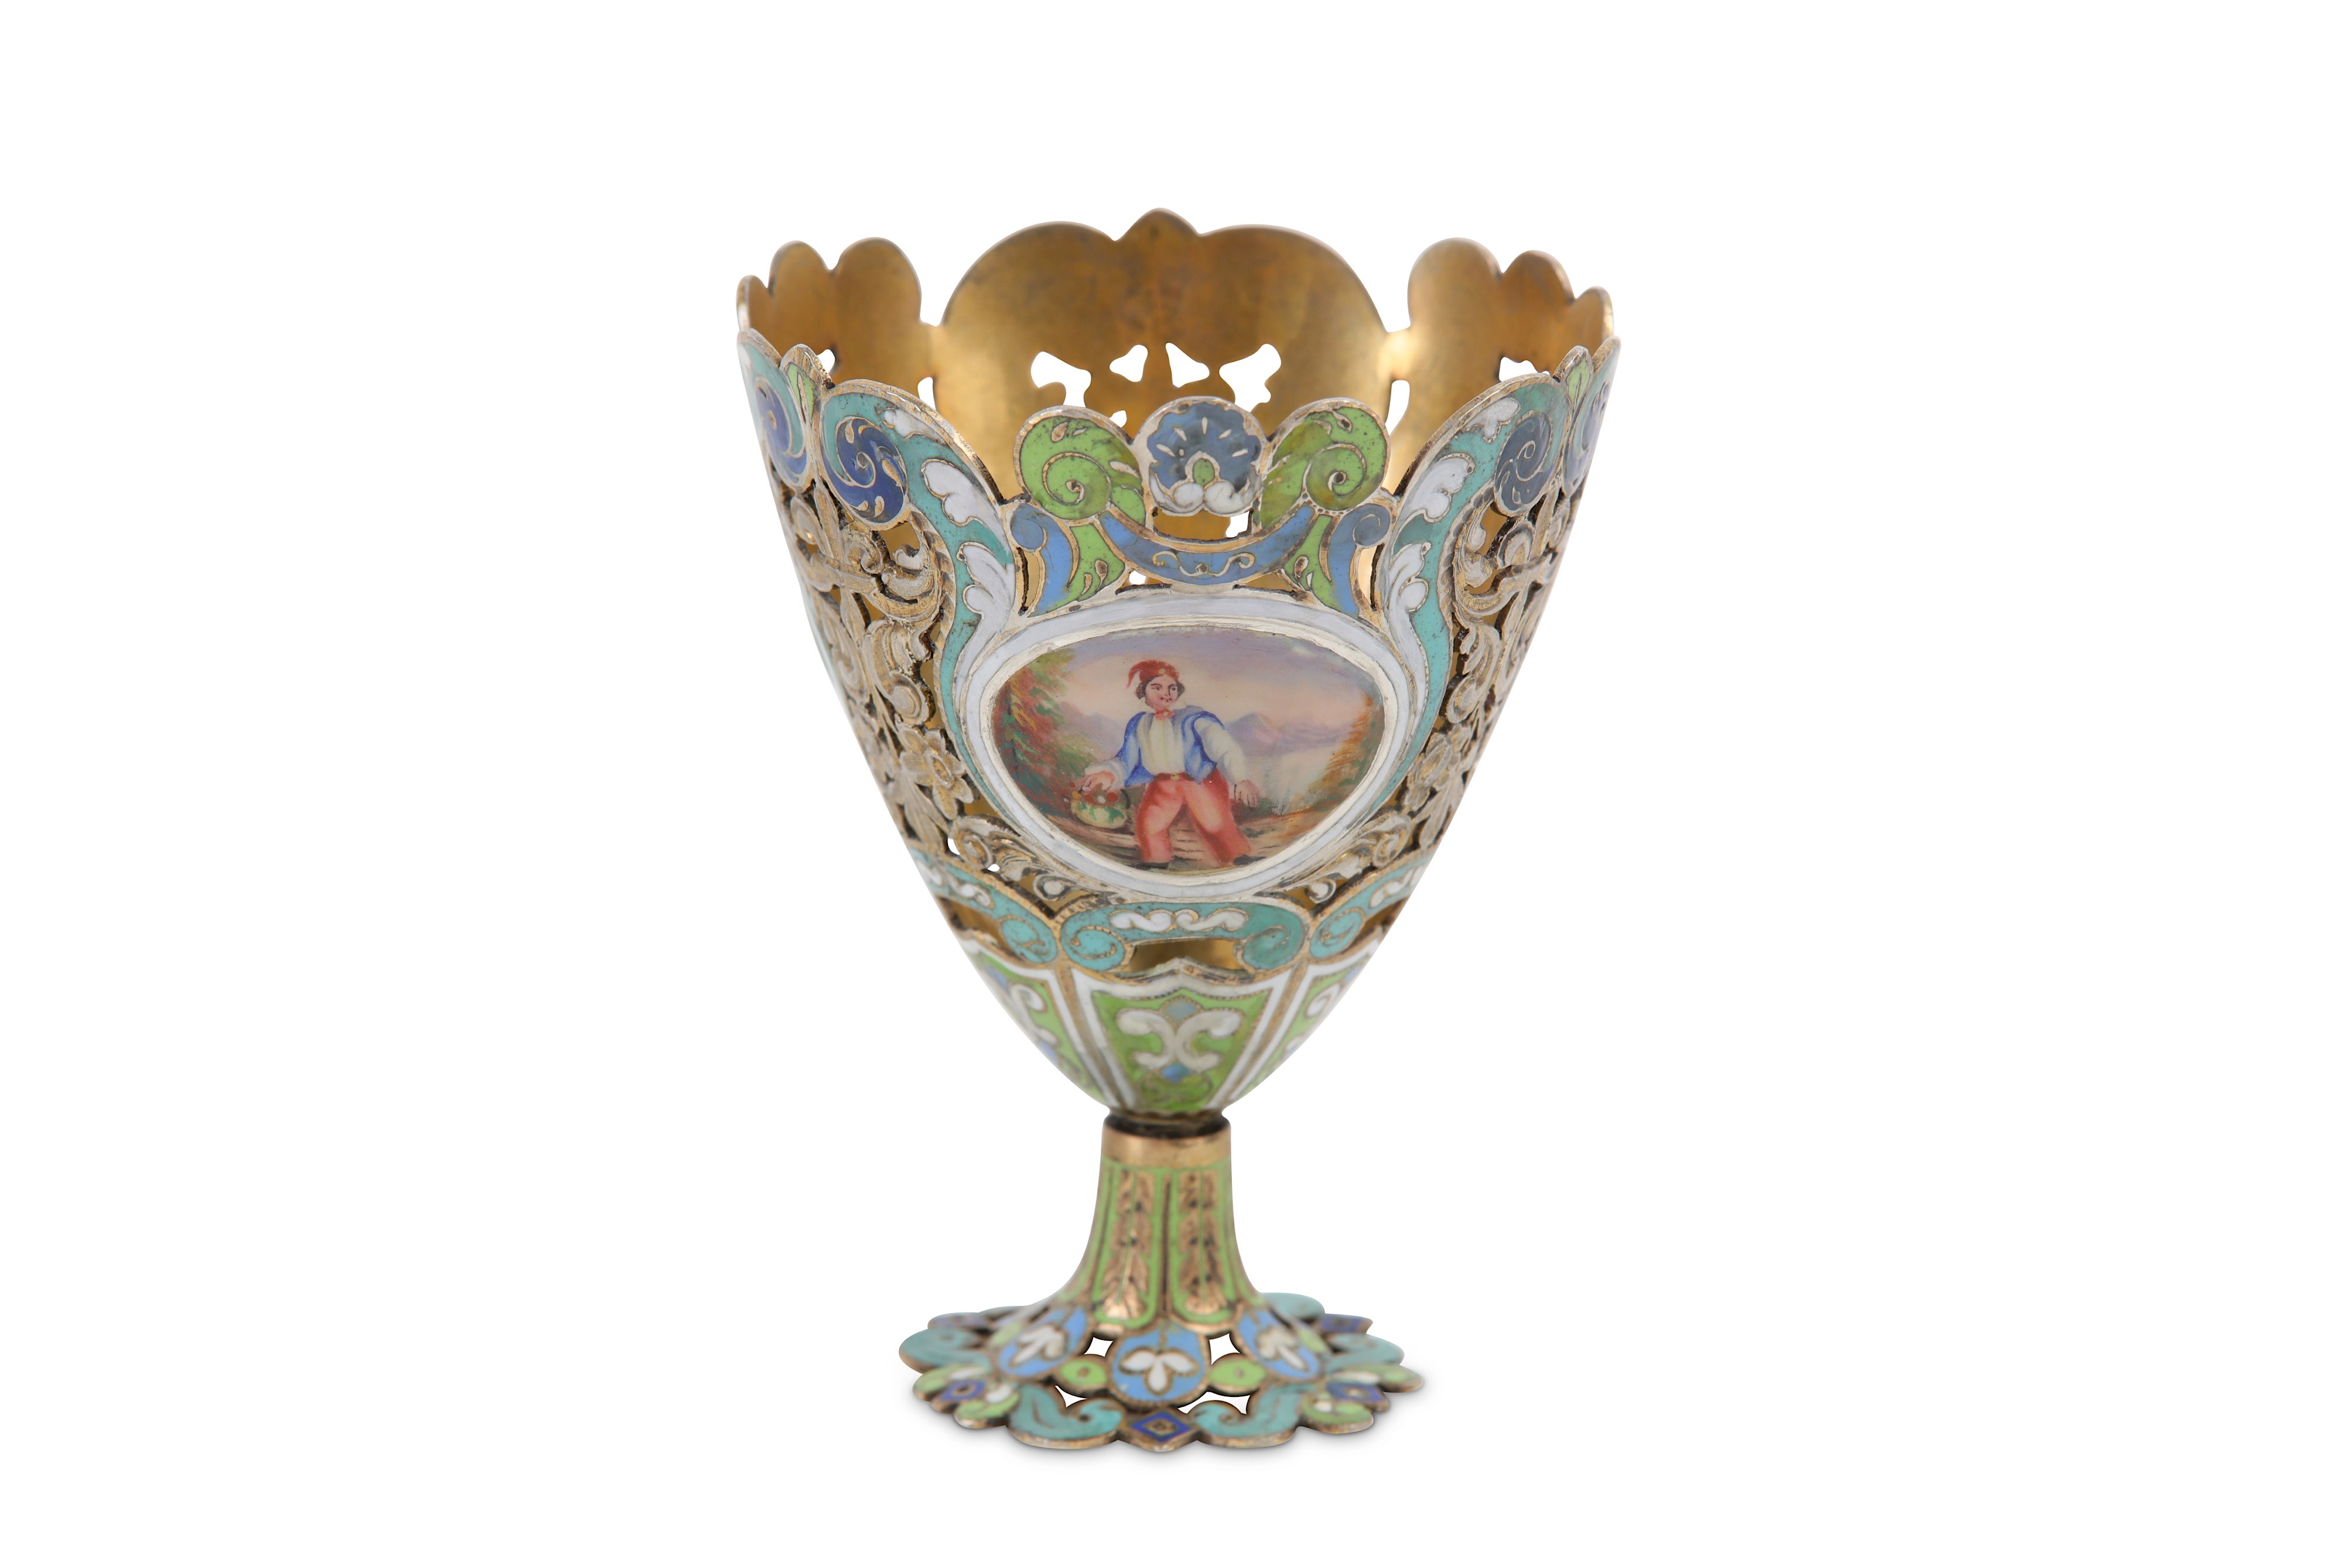 An early 20th century continental unmarked silver-gilt and enamel zarf, possibly Swiss - Image 2 of 3